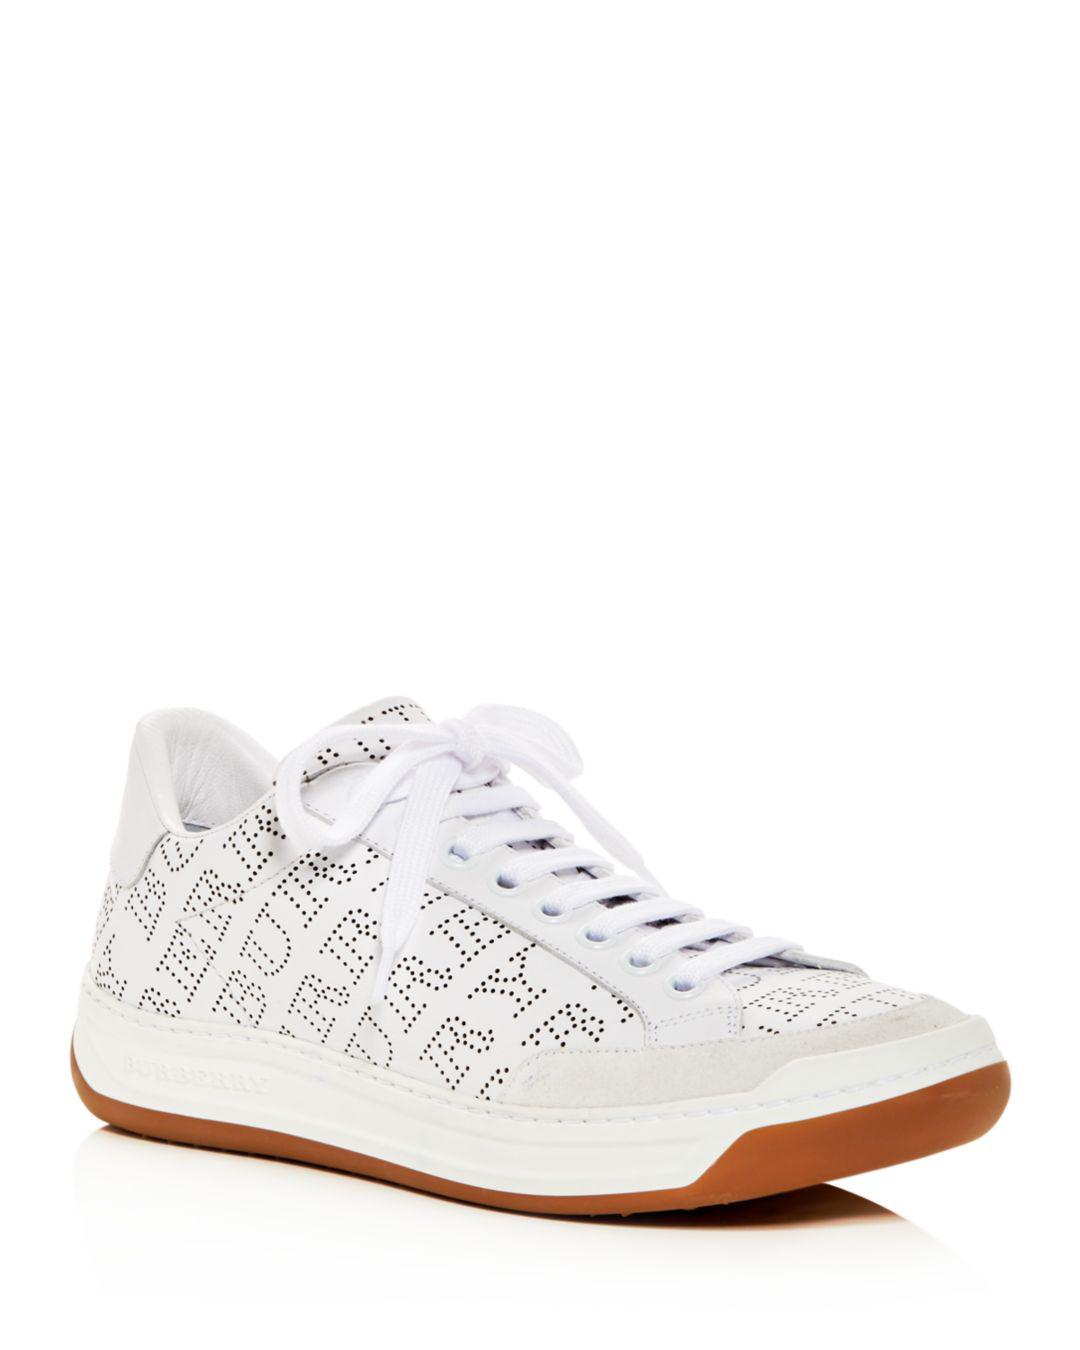 Burberry Perforated Logo Leather Sneaker in White - Save 8% - Lyst